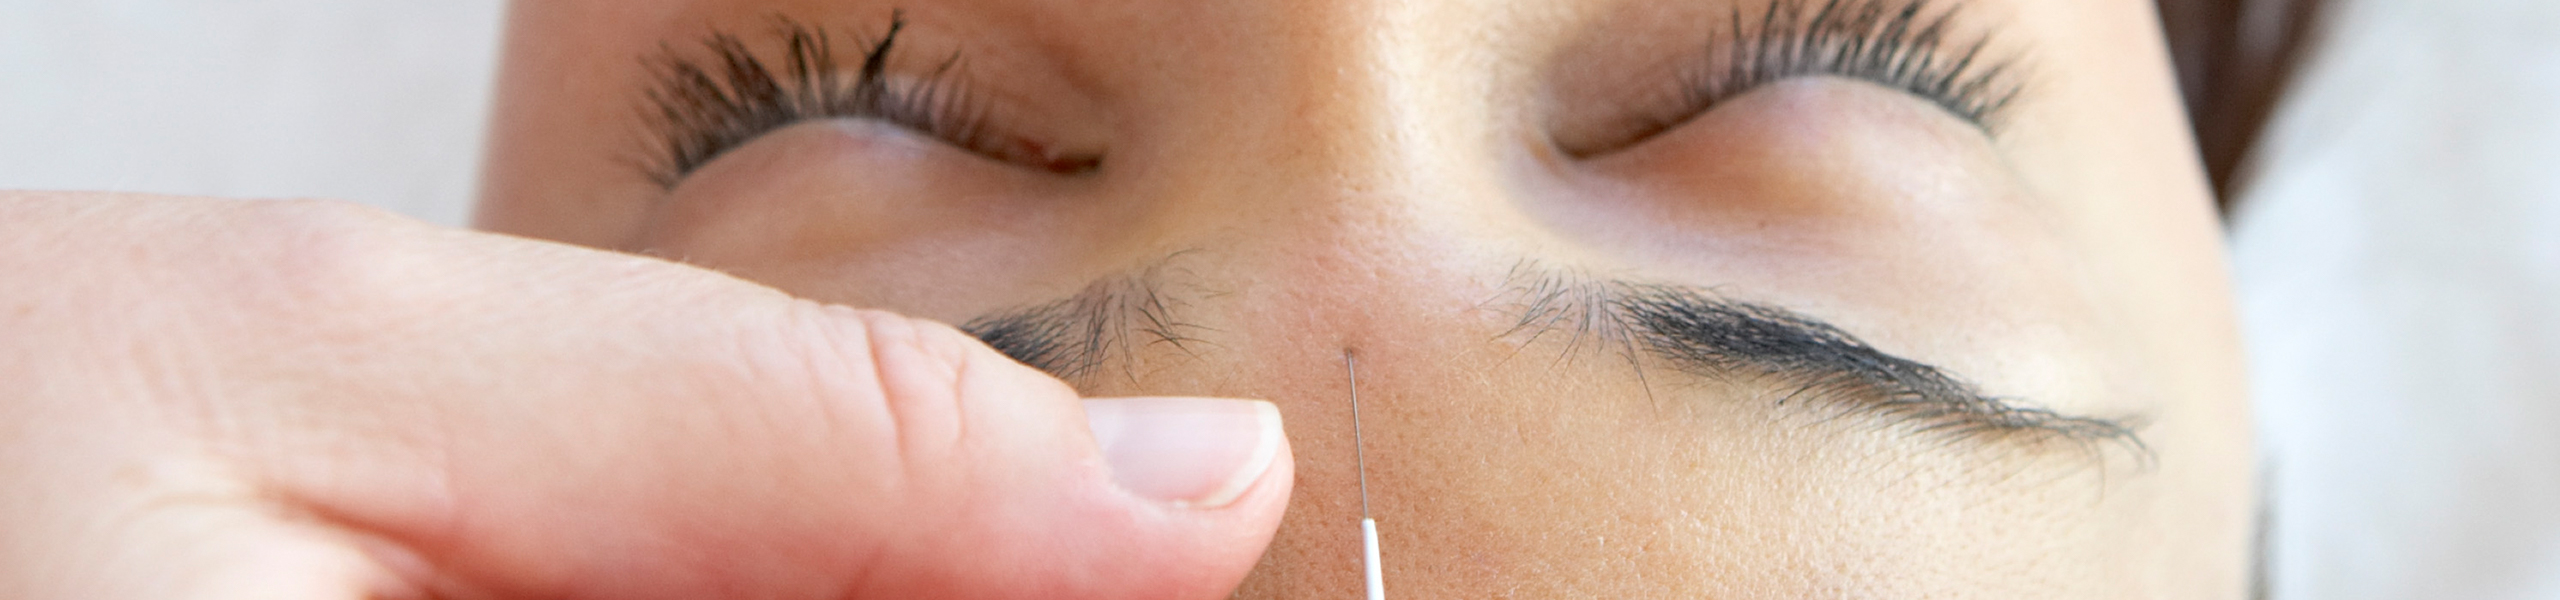 A hand gently sticks a needle into person’s forehead for acupuncture treatment